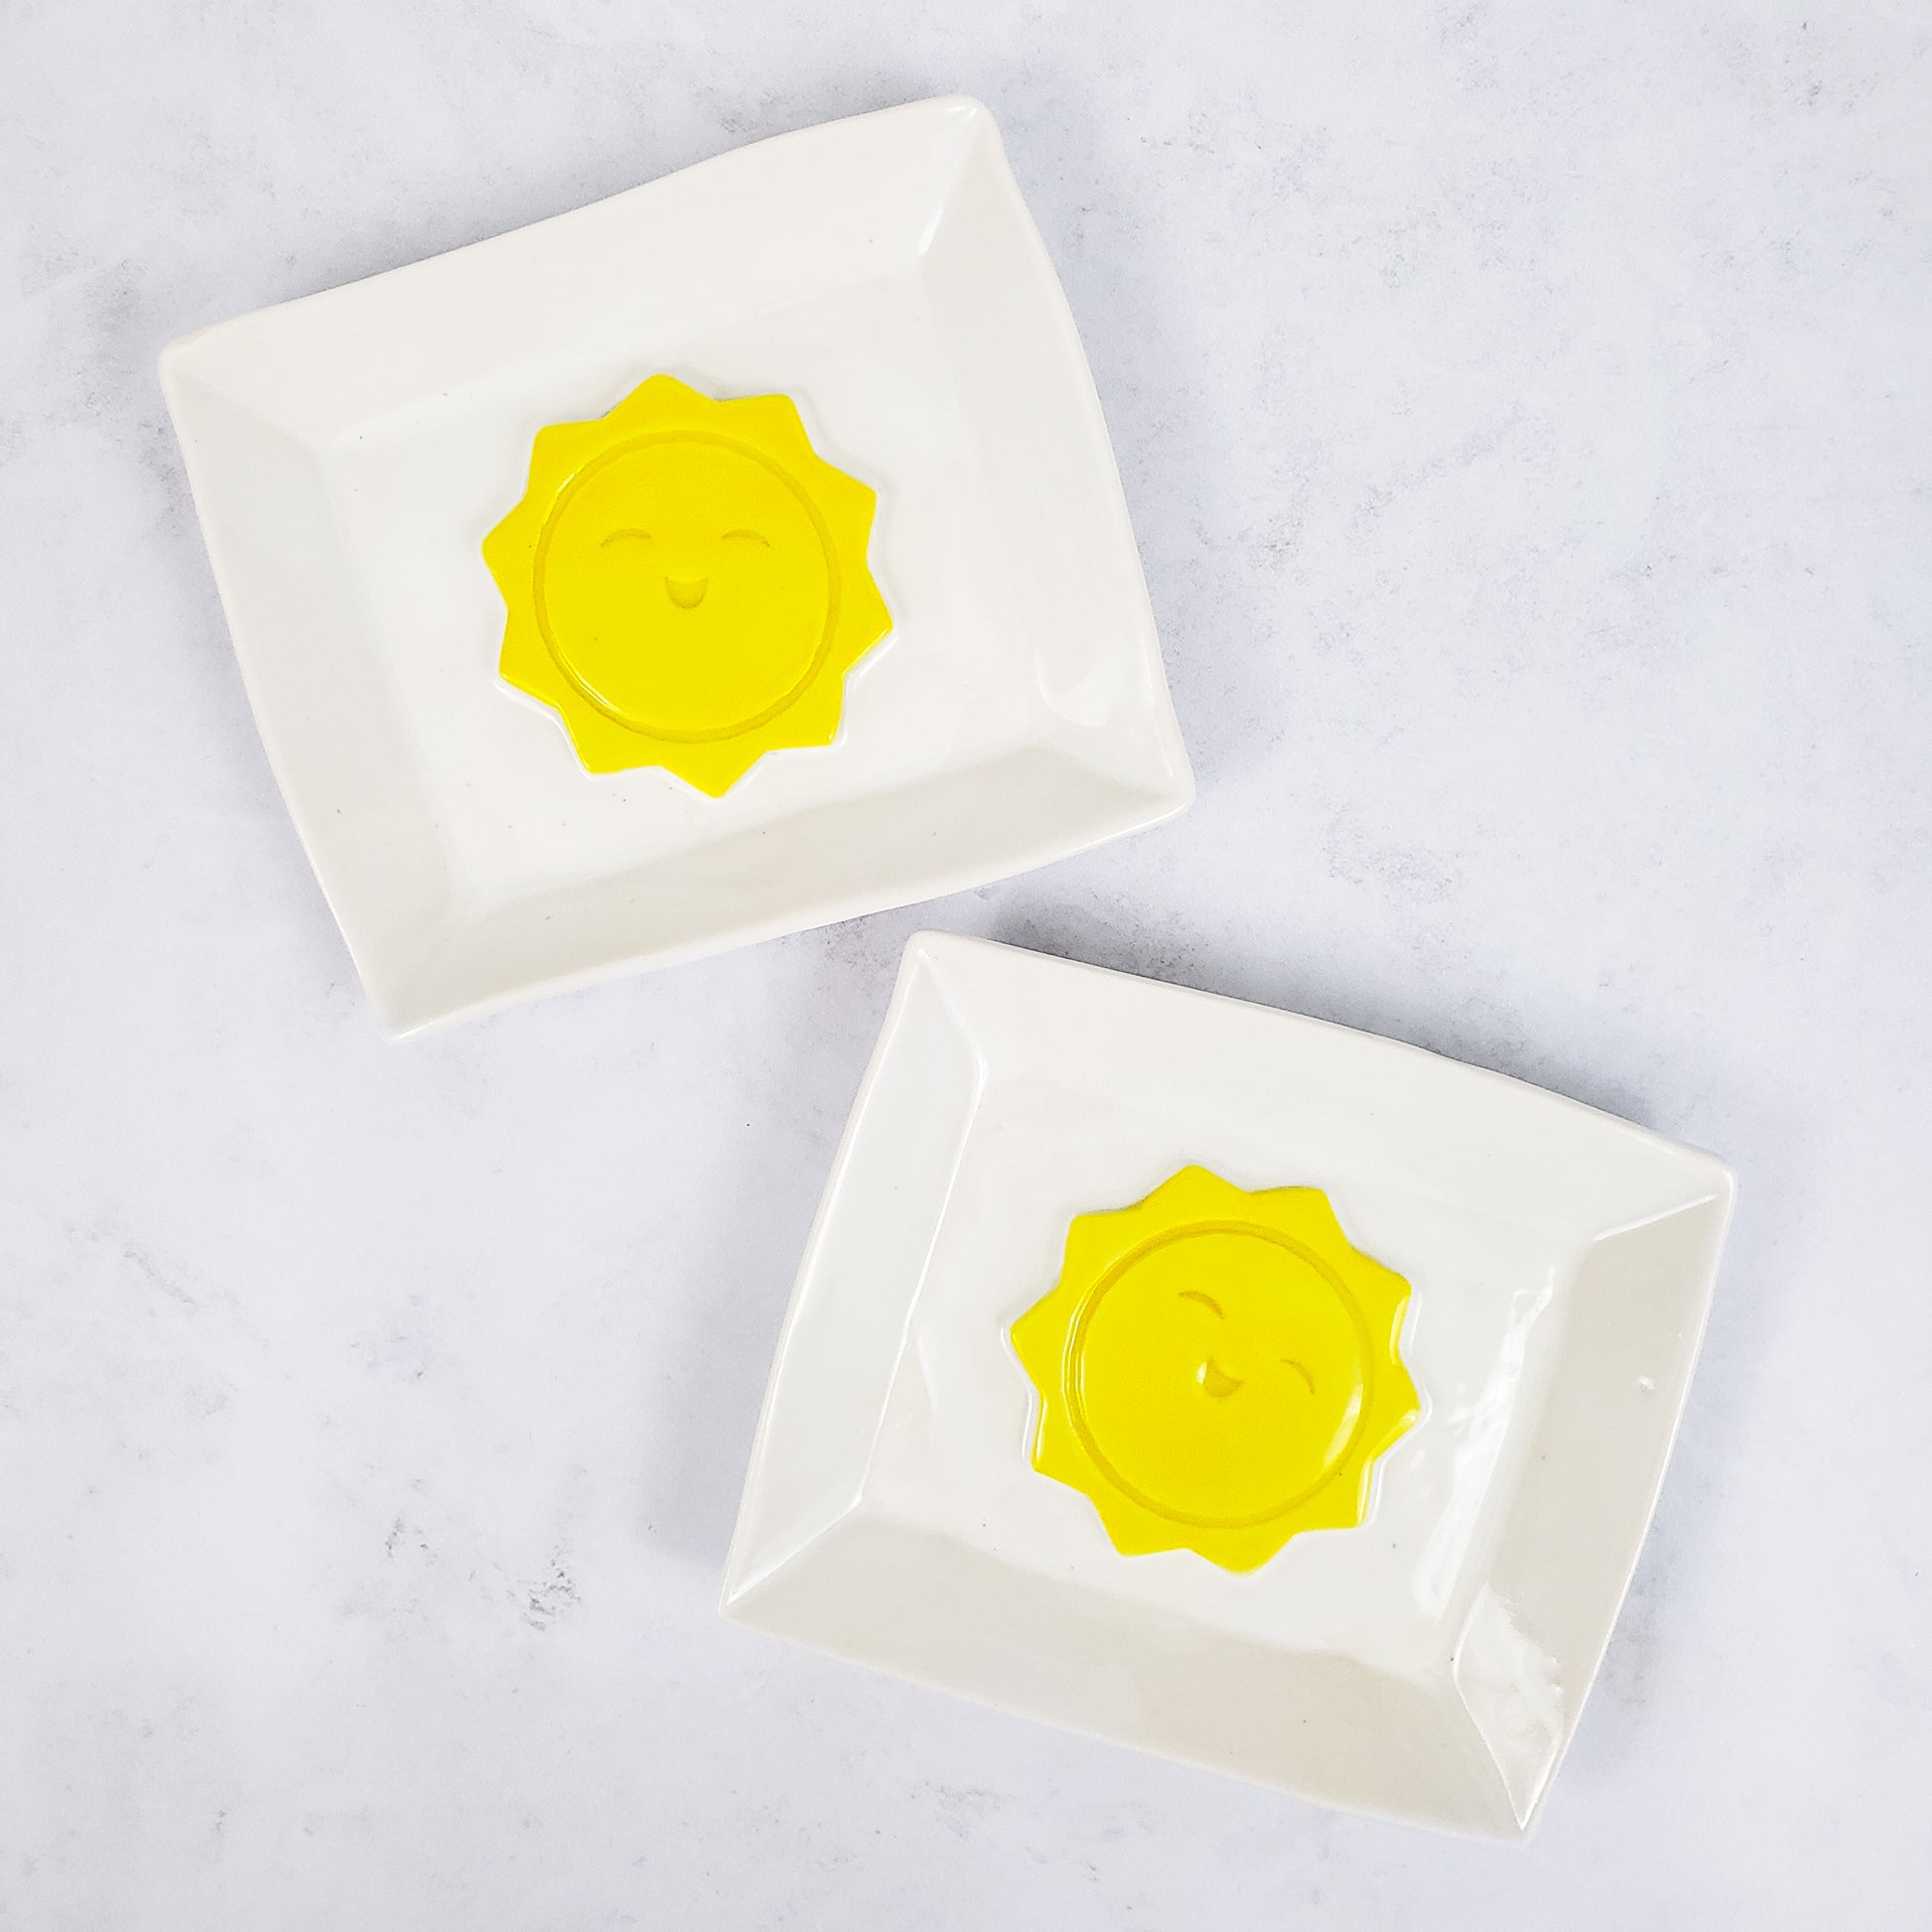 Two white rectangular soap dishes with yellow sunshines in the middle